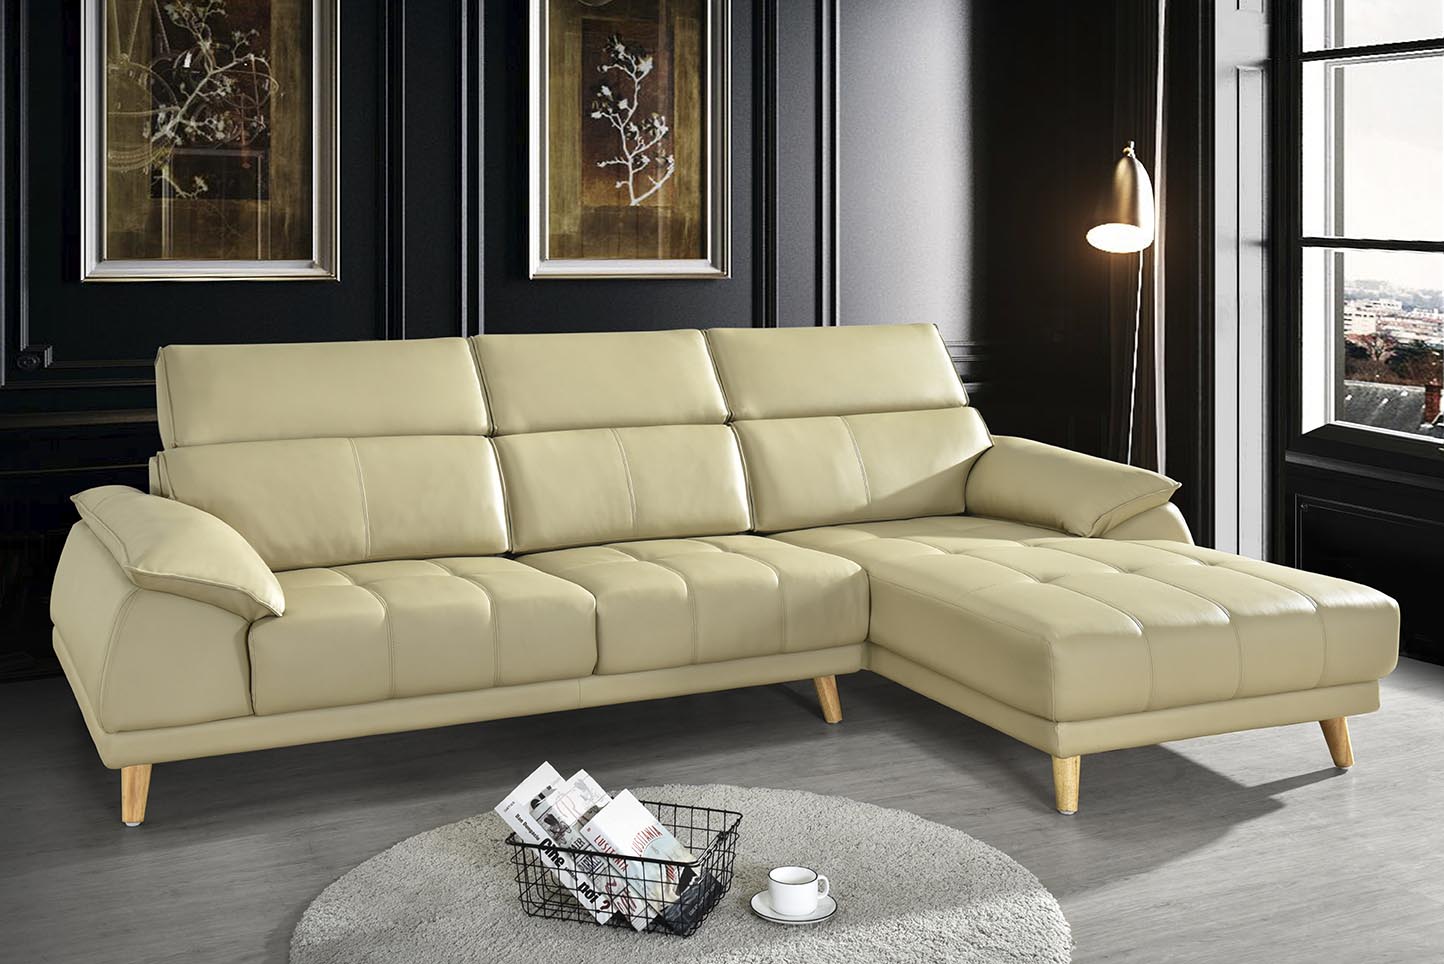 Rossie L Shaped Full Thick Leather Sofa, Leather Couch L Shape